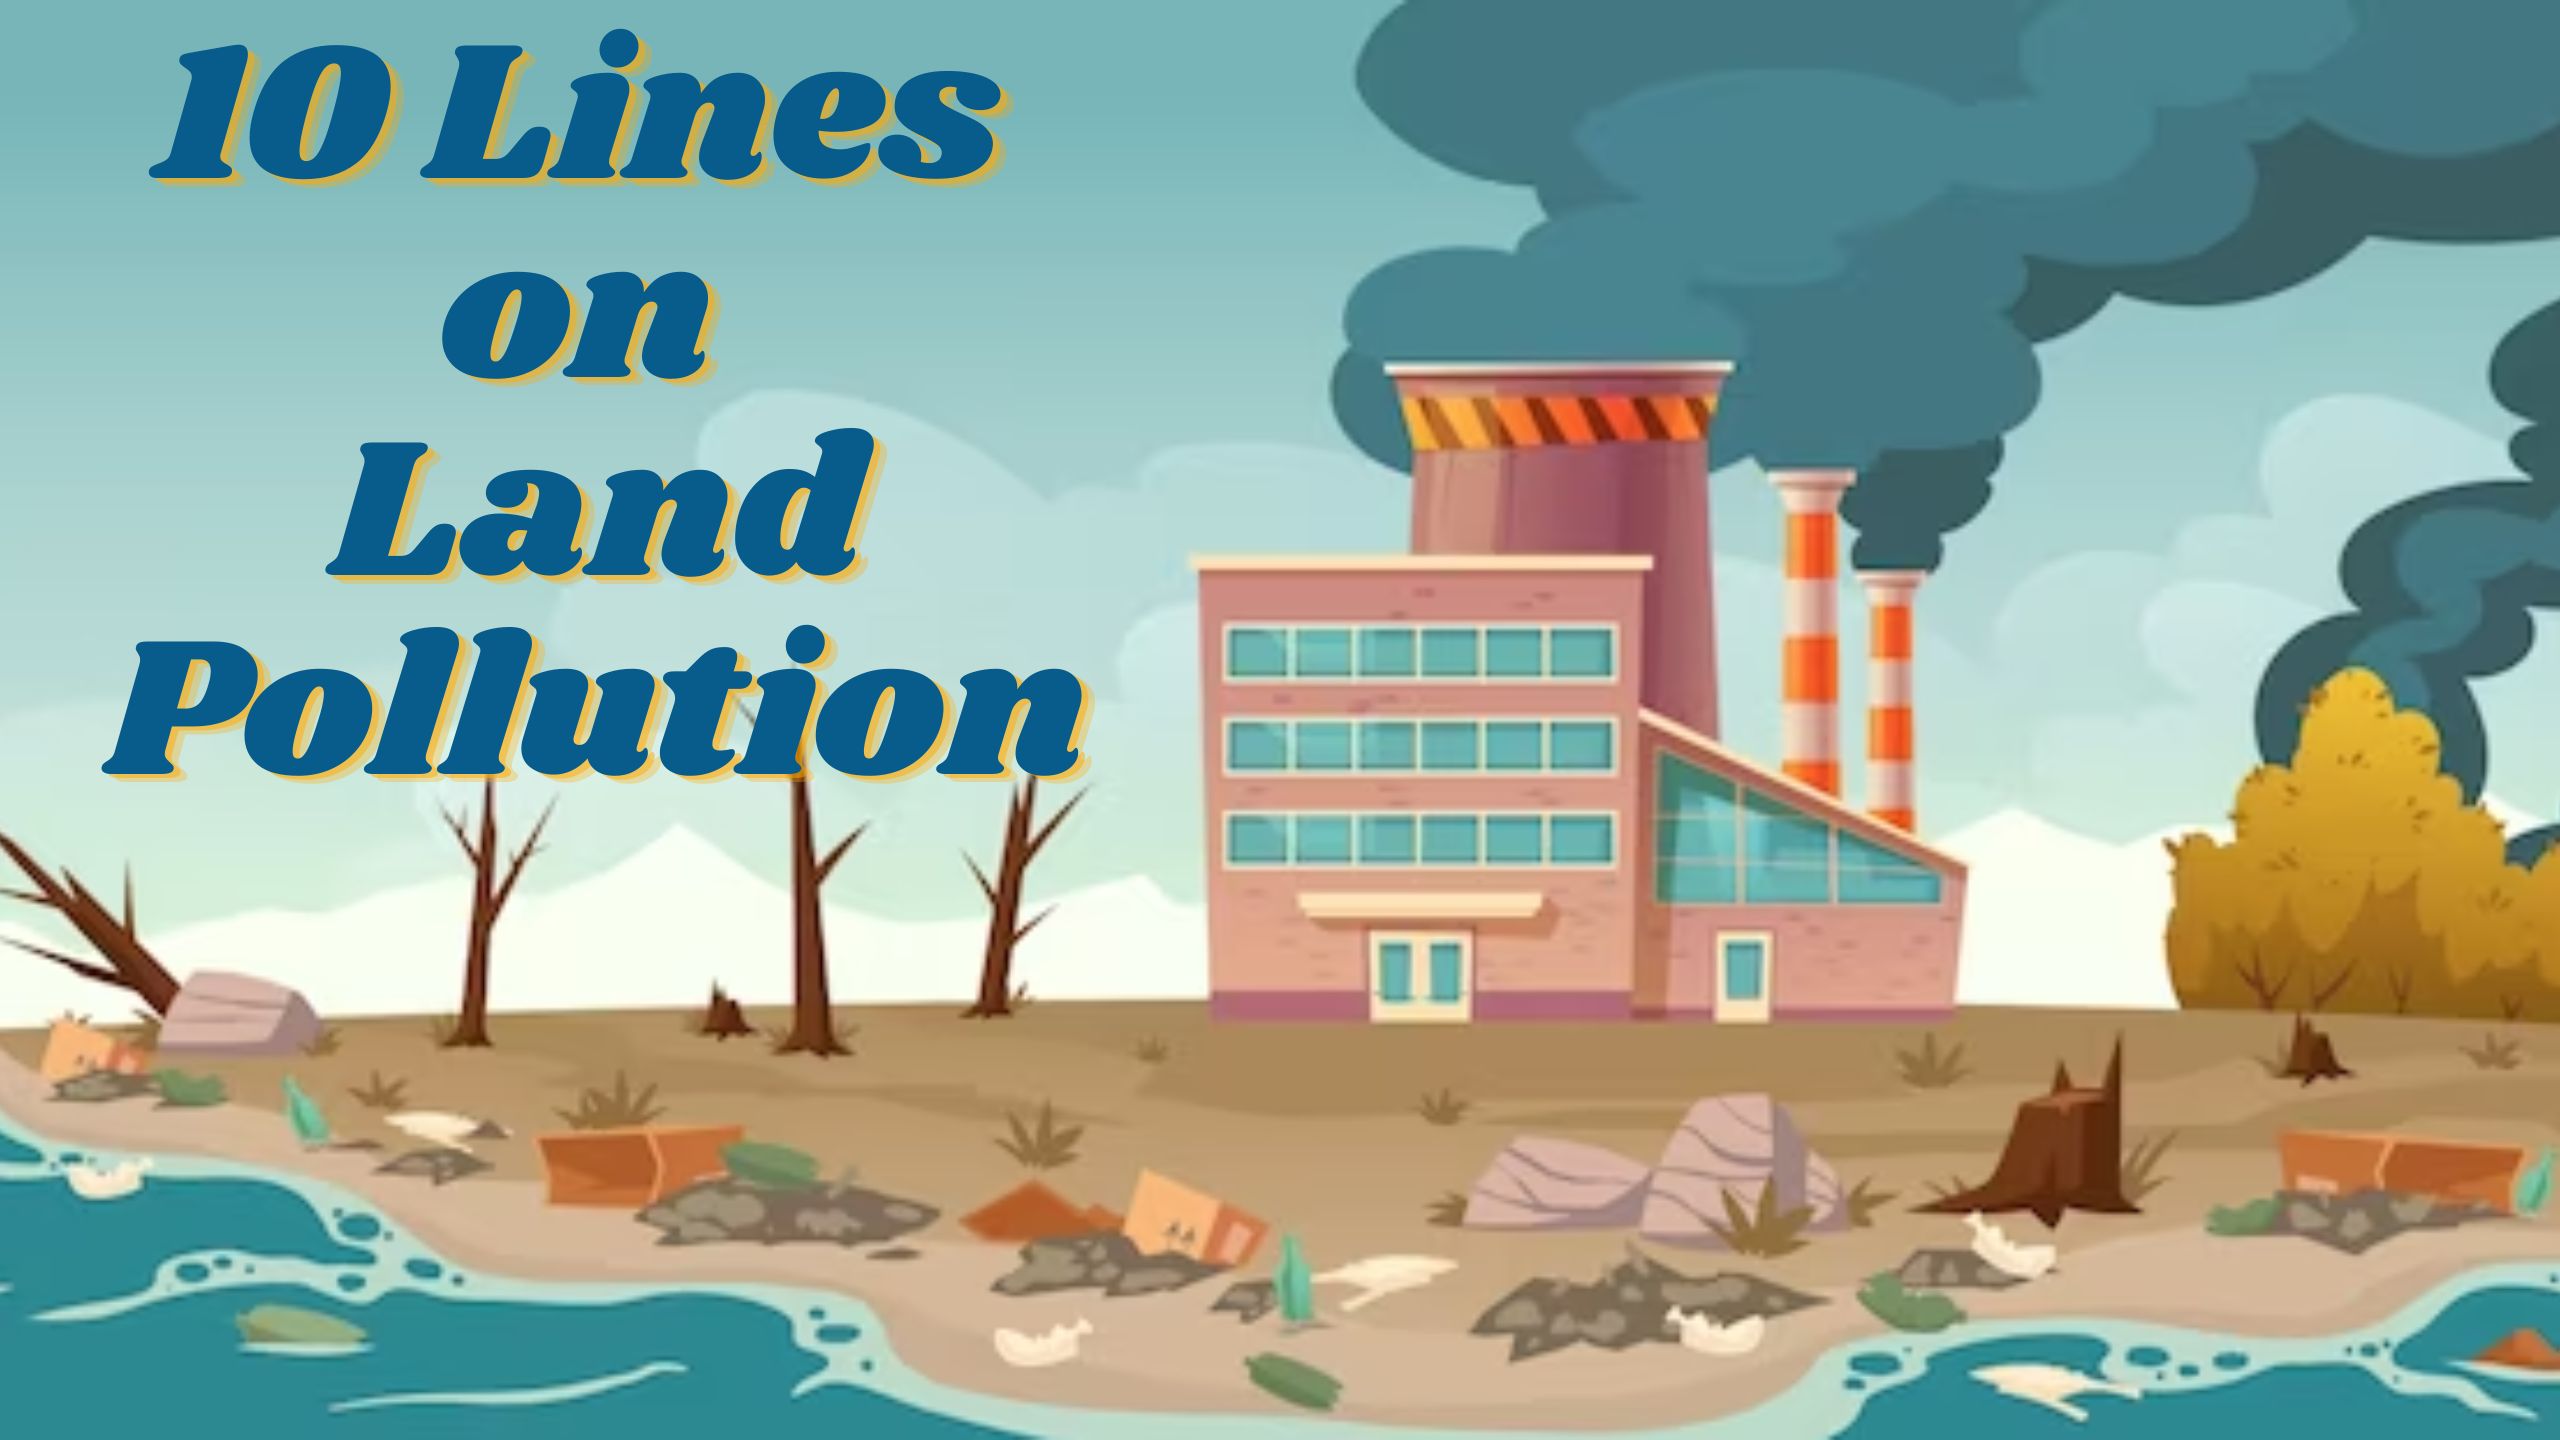 10 Lines on land pollution